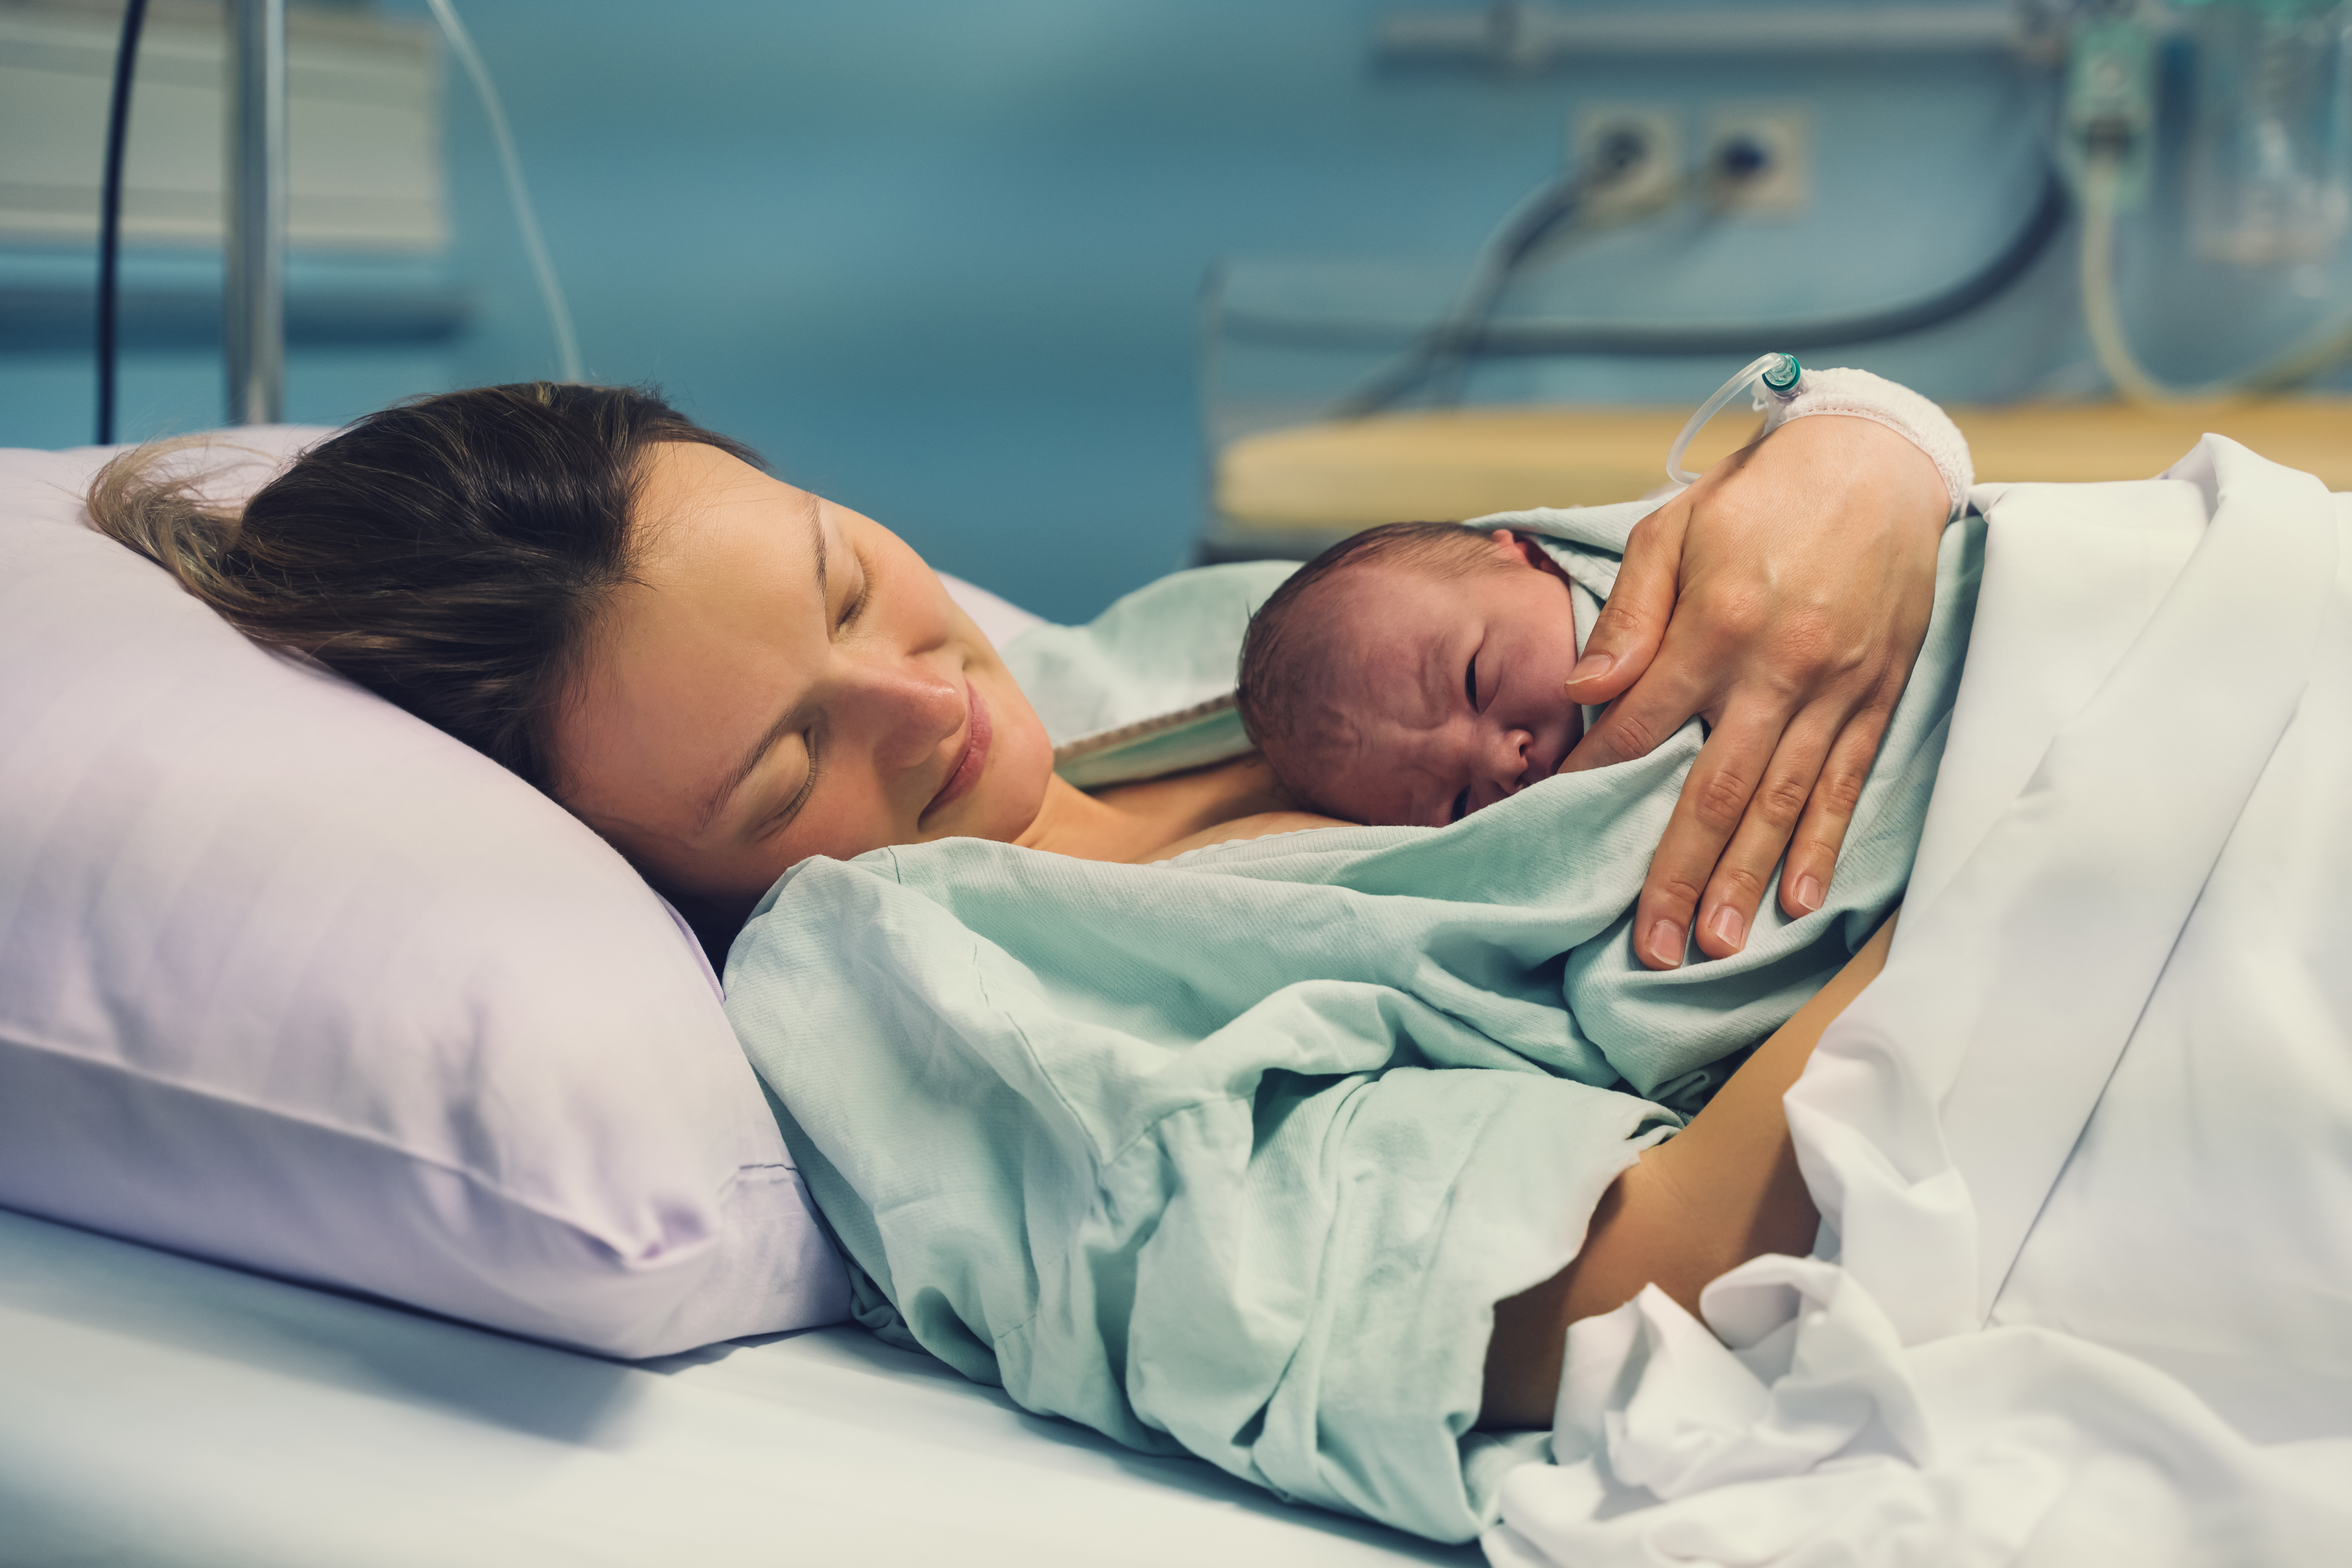 Woman and passionately holding her newborn. | Source: Shutterstock